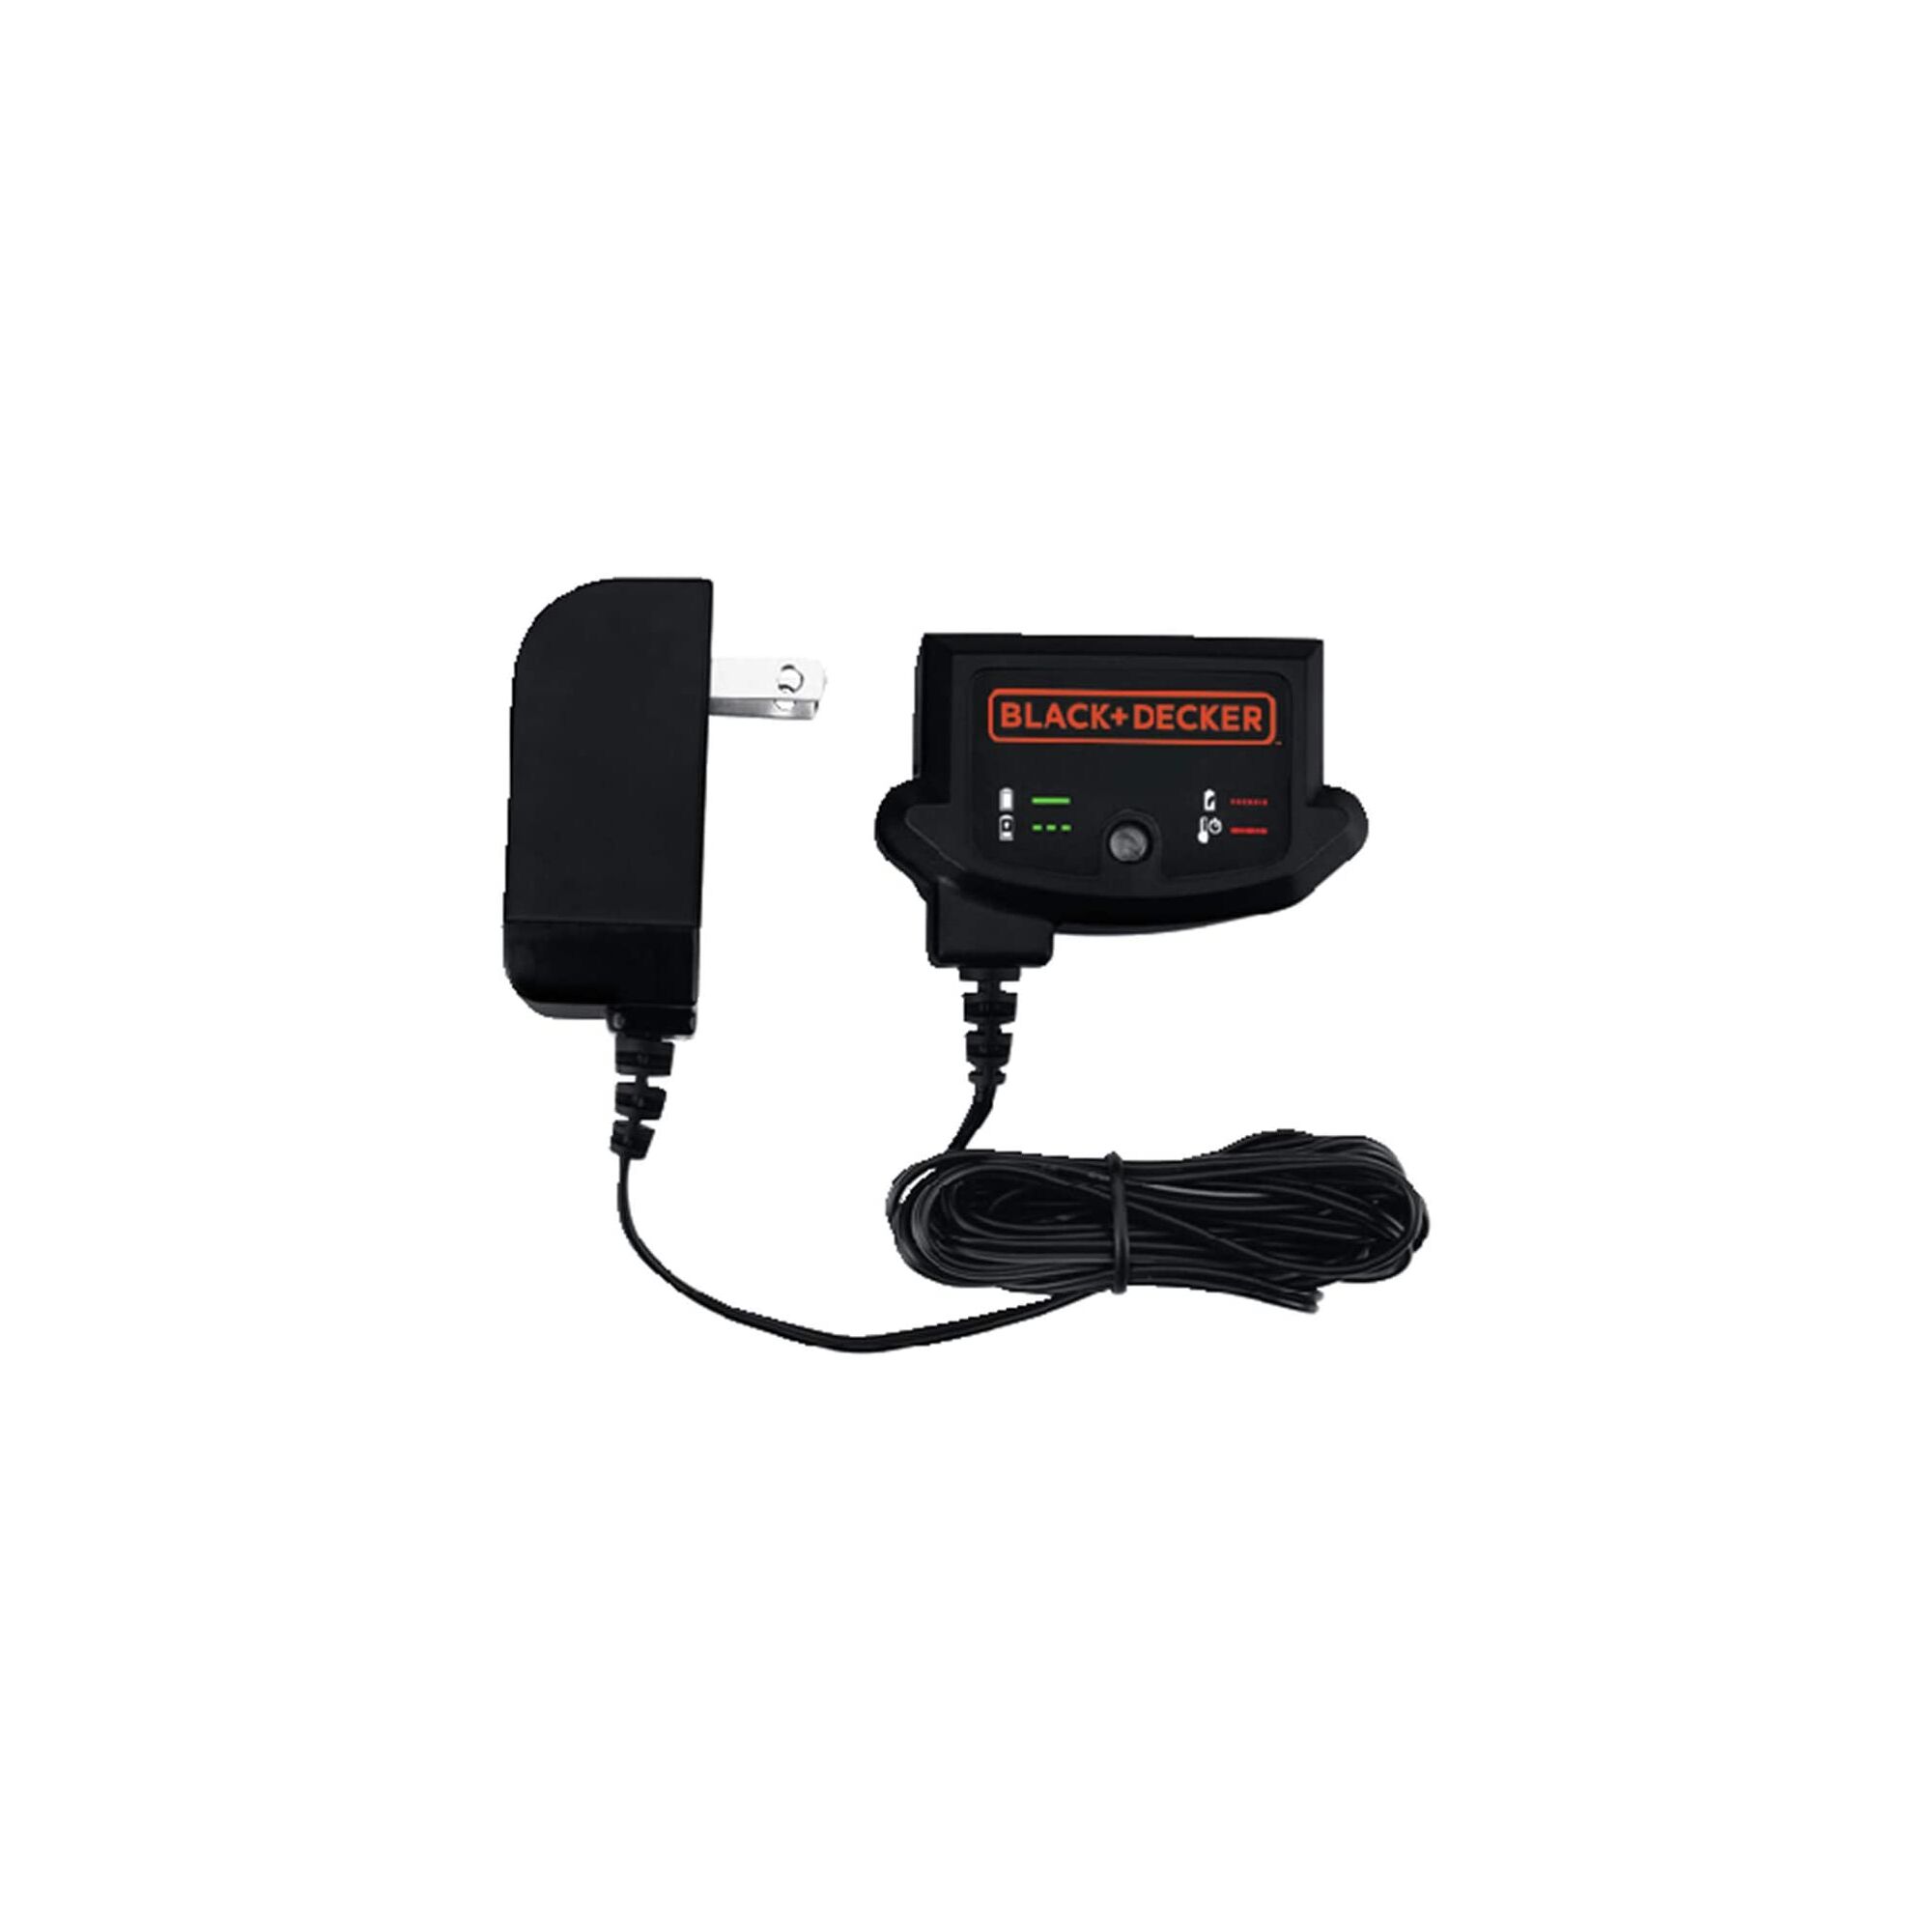 Profile of the wall charger for the 20V BLACK+DECKER Powerconnect battery